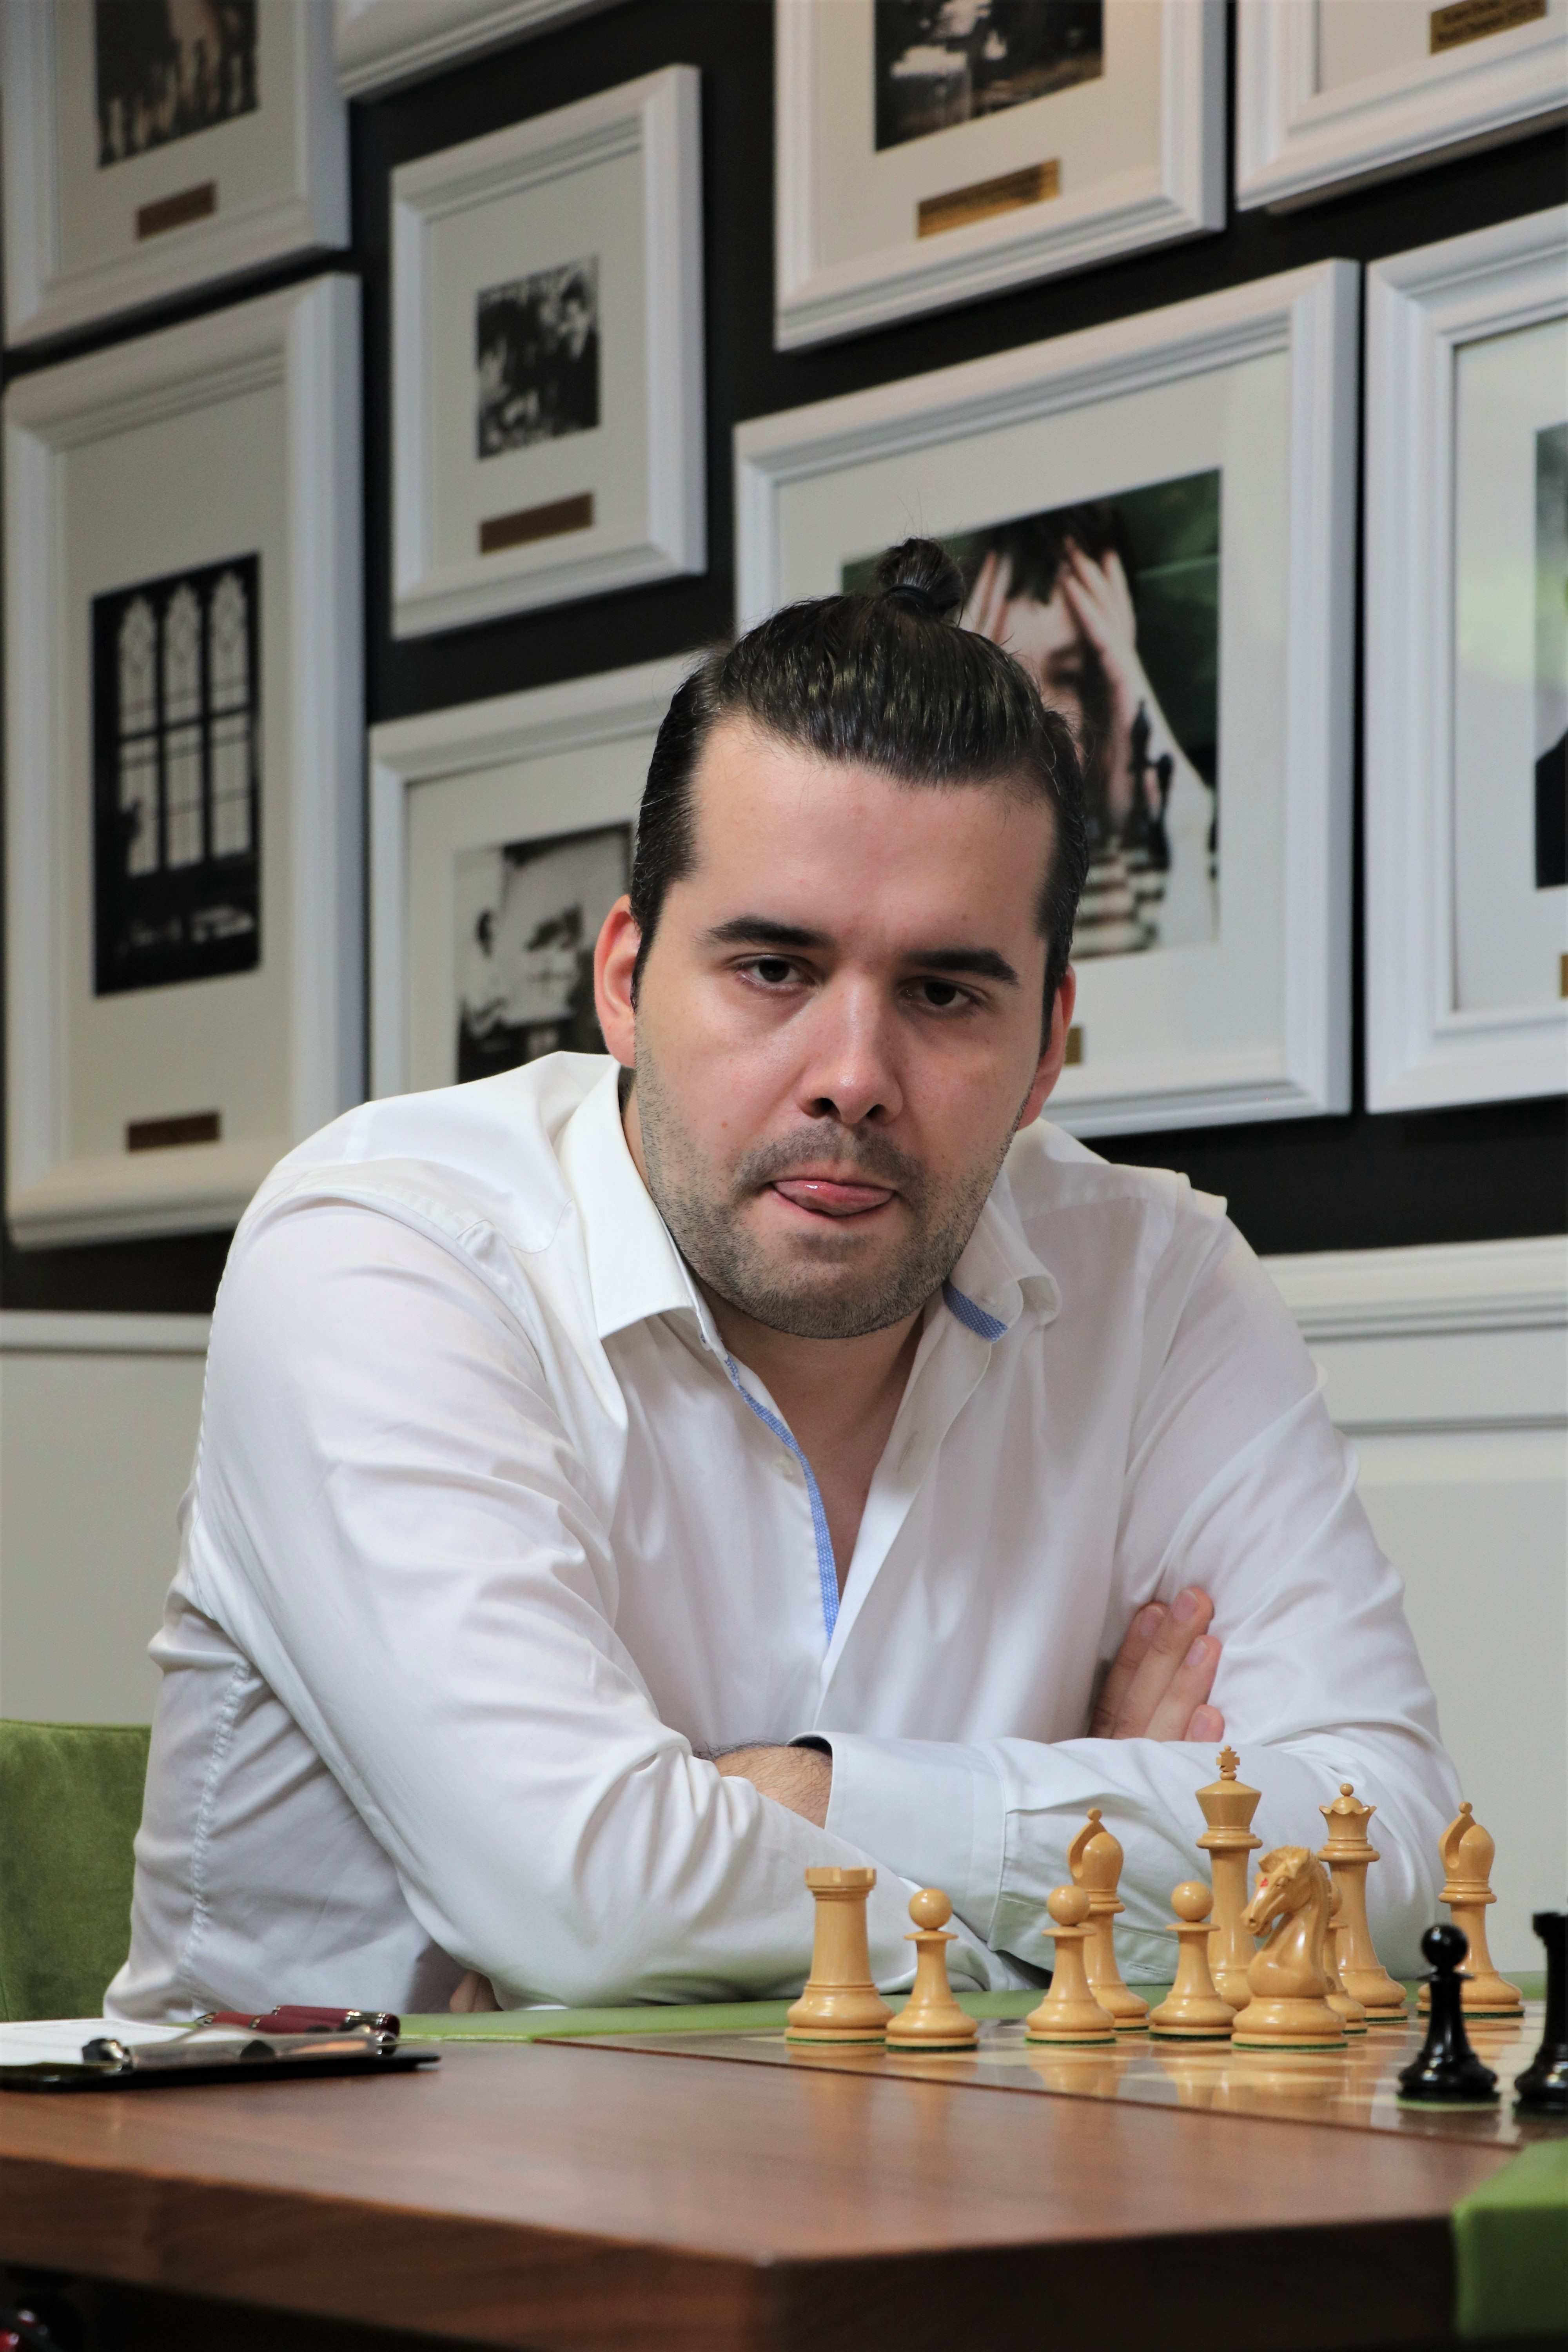 On chess: Grandmaster Ian Nepomniachtchi Wins FIDE Candidates, Qualifying  To Face face Magnus Carlsen In The World Chess Championship